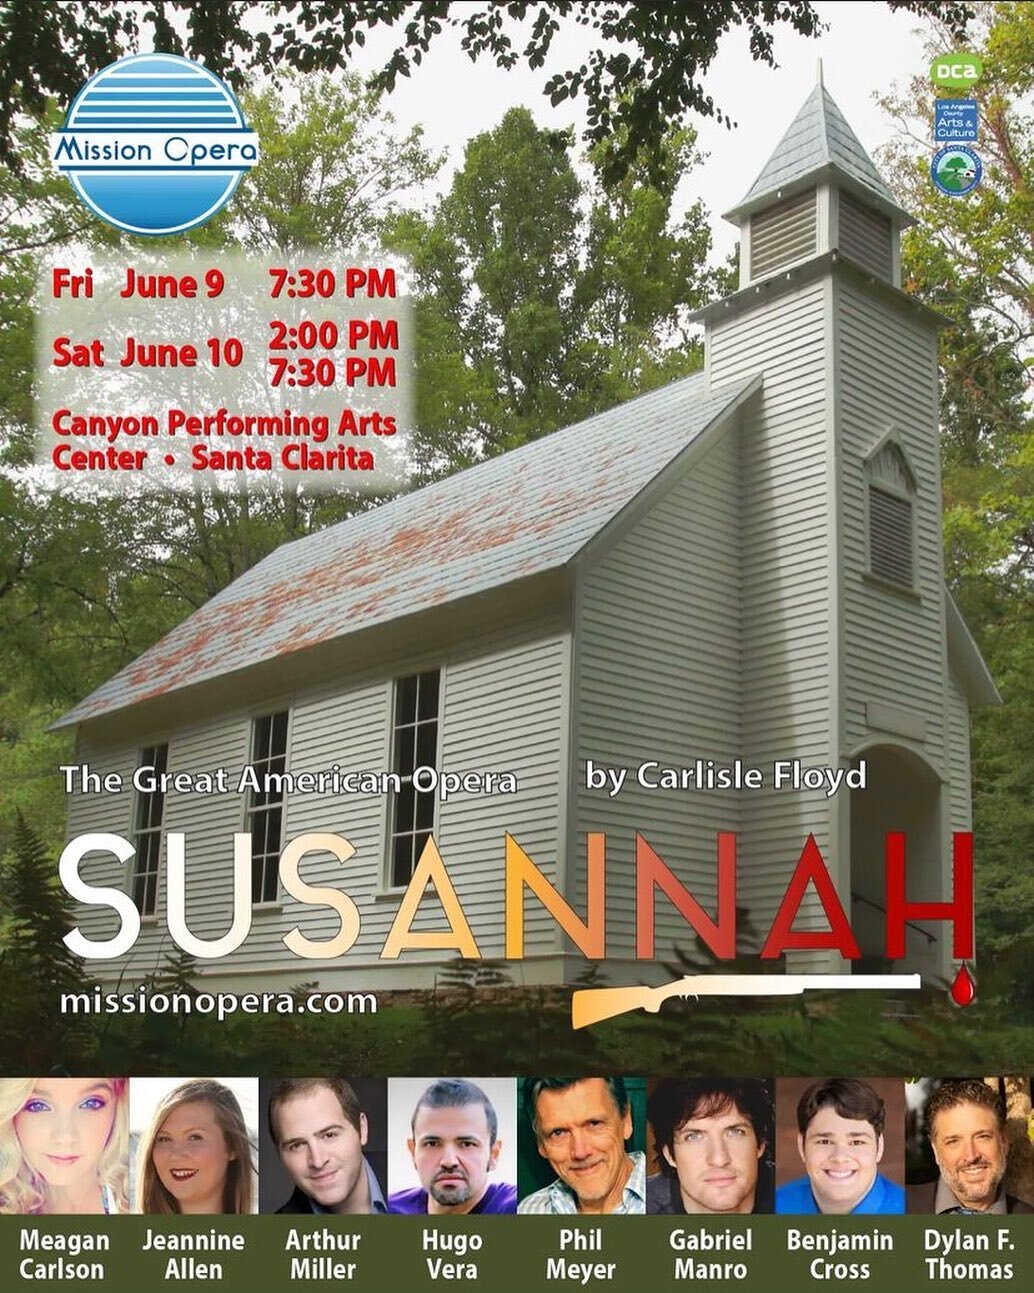 I&rsquo;m thrilled to be playing the role of Mrs. Ott in Susannah! This is a wildly talented group performing - this is one that you won&rsquo;t want to miss! @mission.opera #susannah #opera #blitchplease #carislefloyd